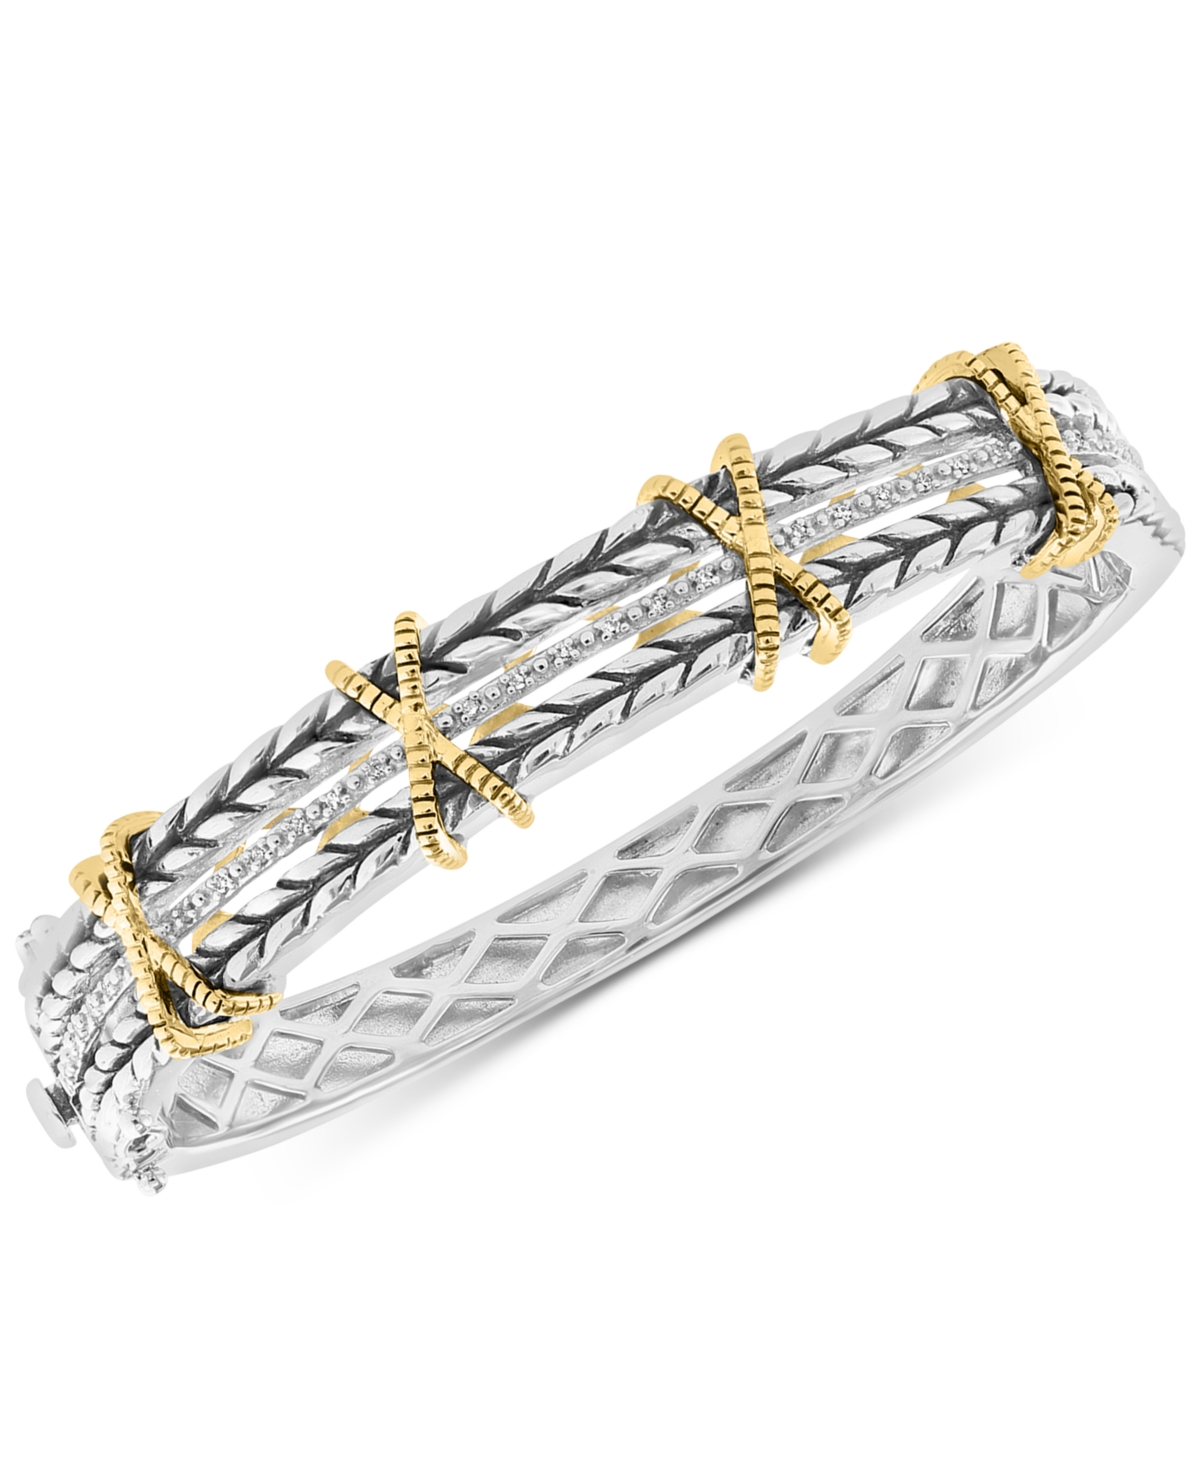 Effy Collection Effy Diamond X Bangle Bracelet (1/8 Ct. T.w.) In Sterling Silver & 18k Gold-plate In K Yellow Gold Over Sterling Silver